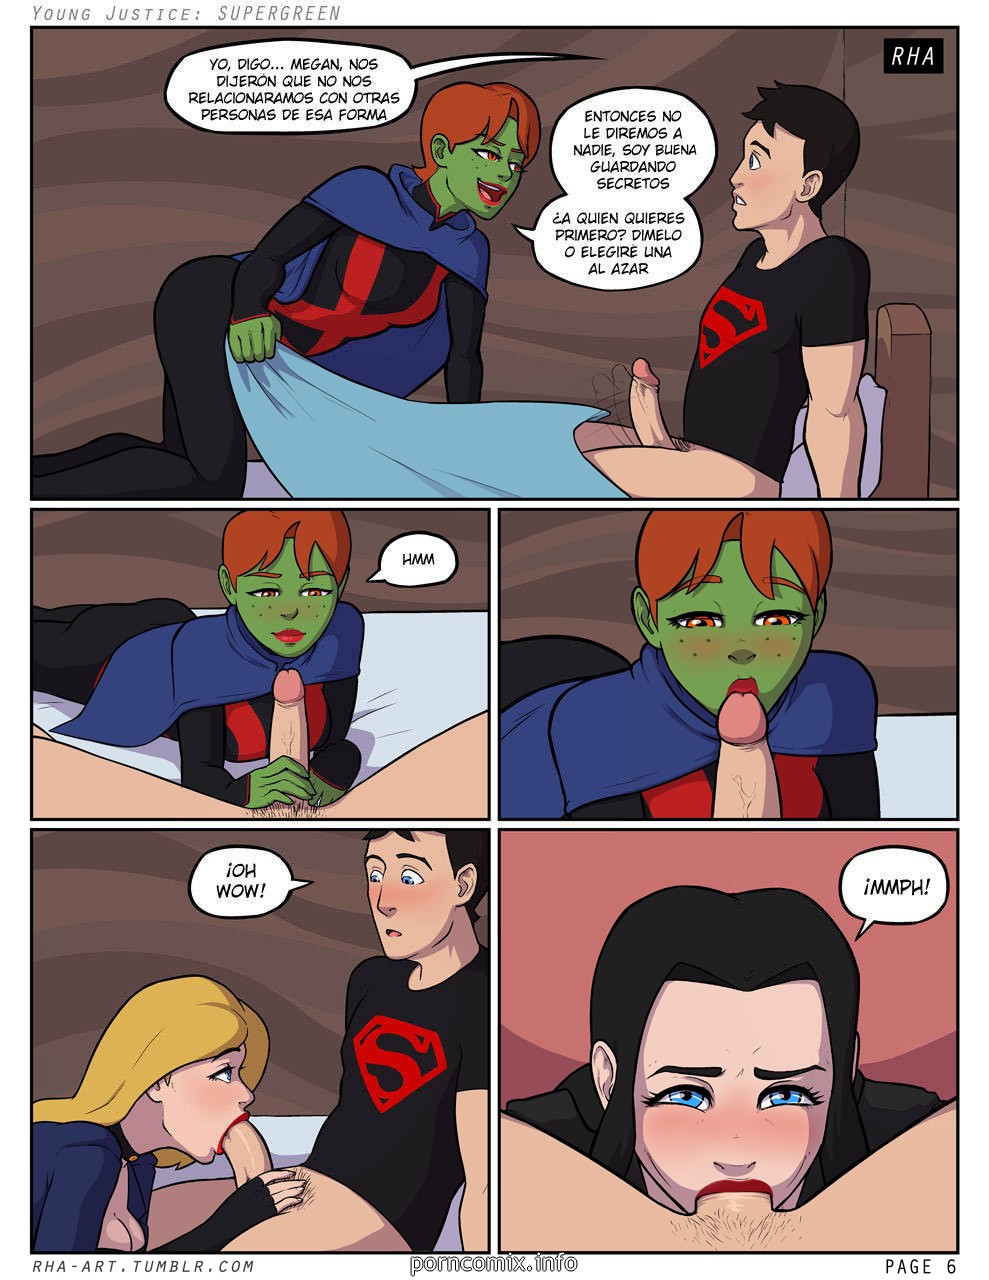 Young Justice - Supergreen - ChoChoX.com